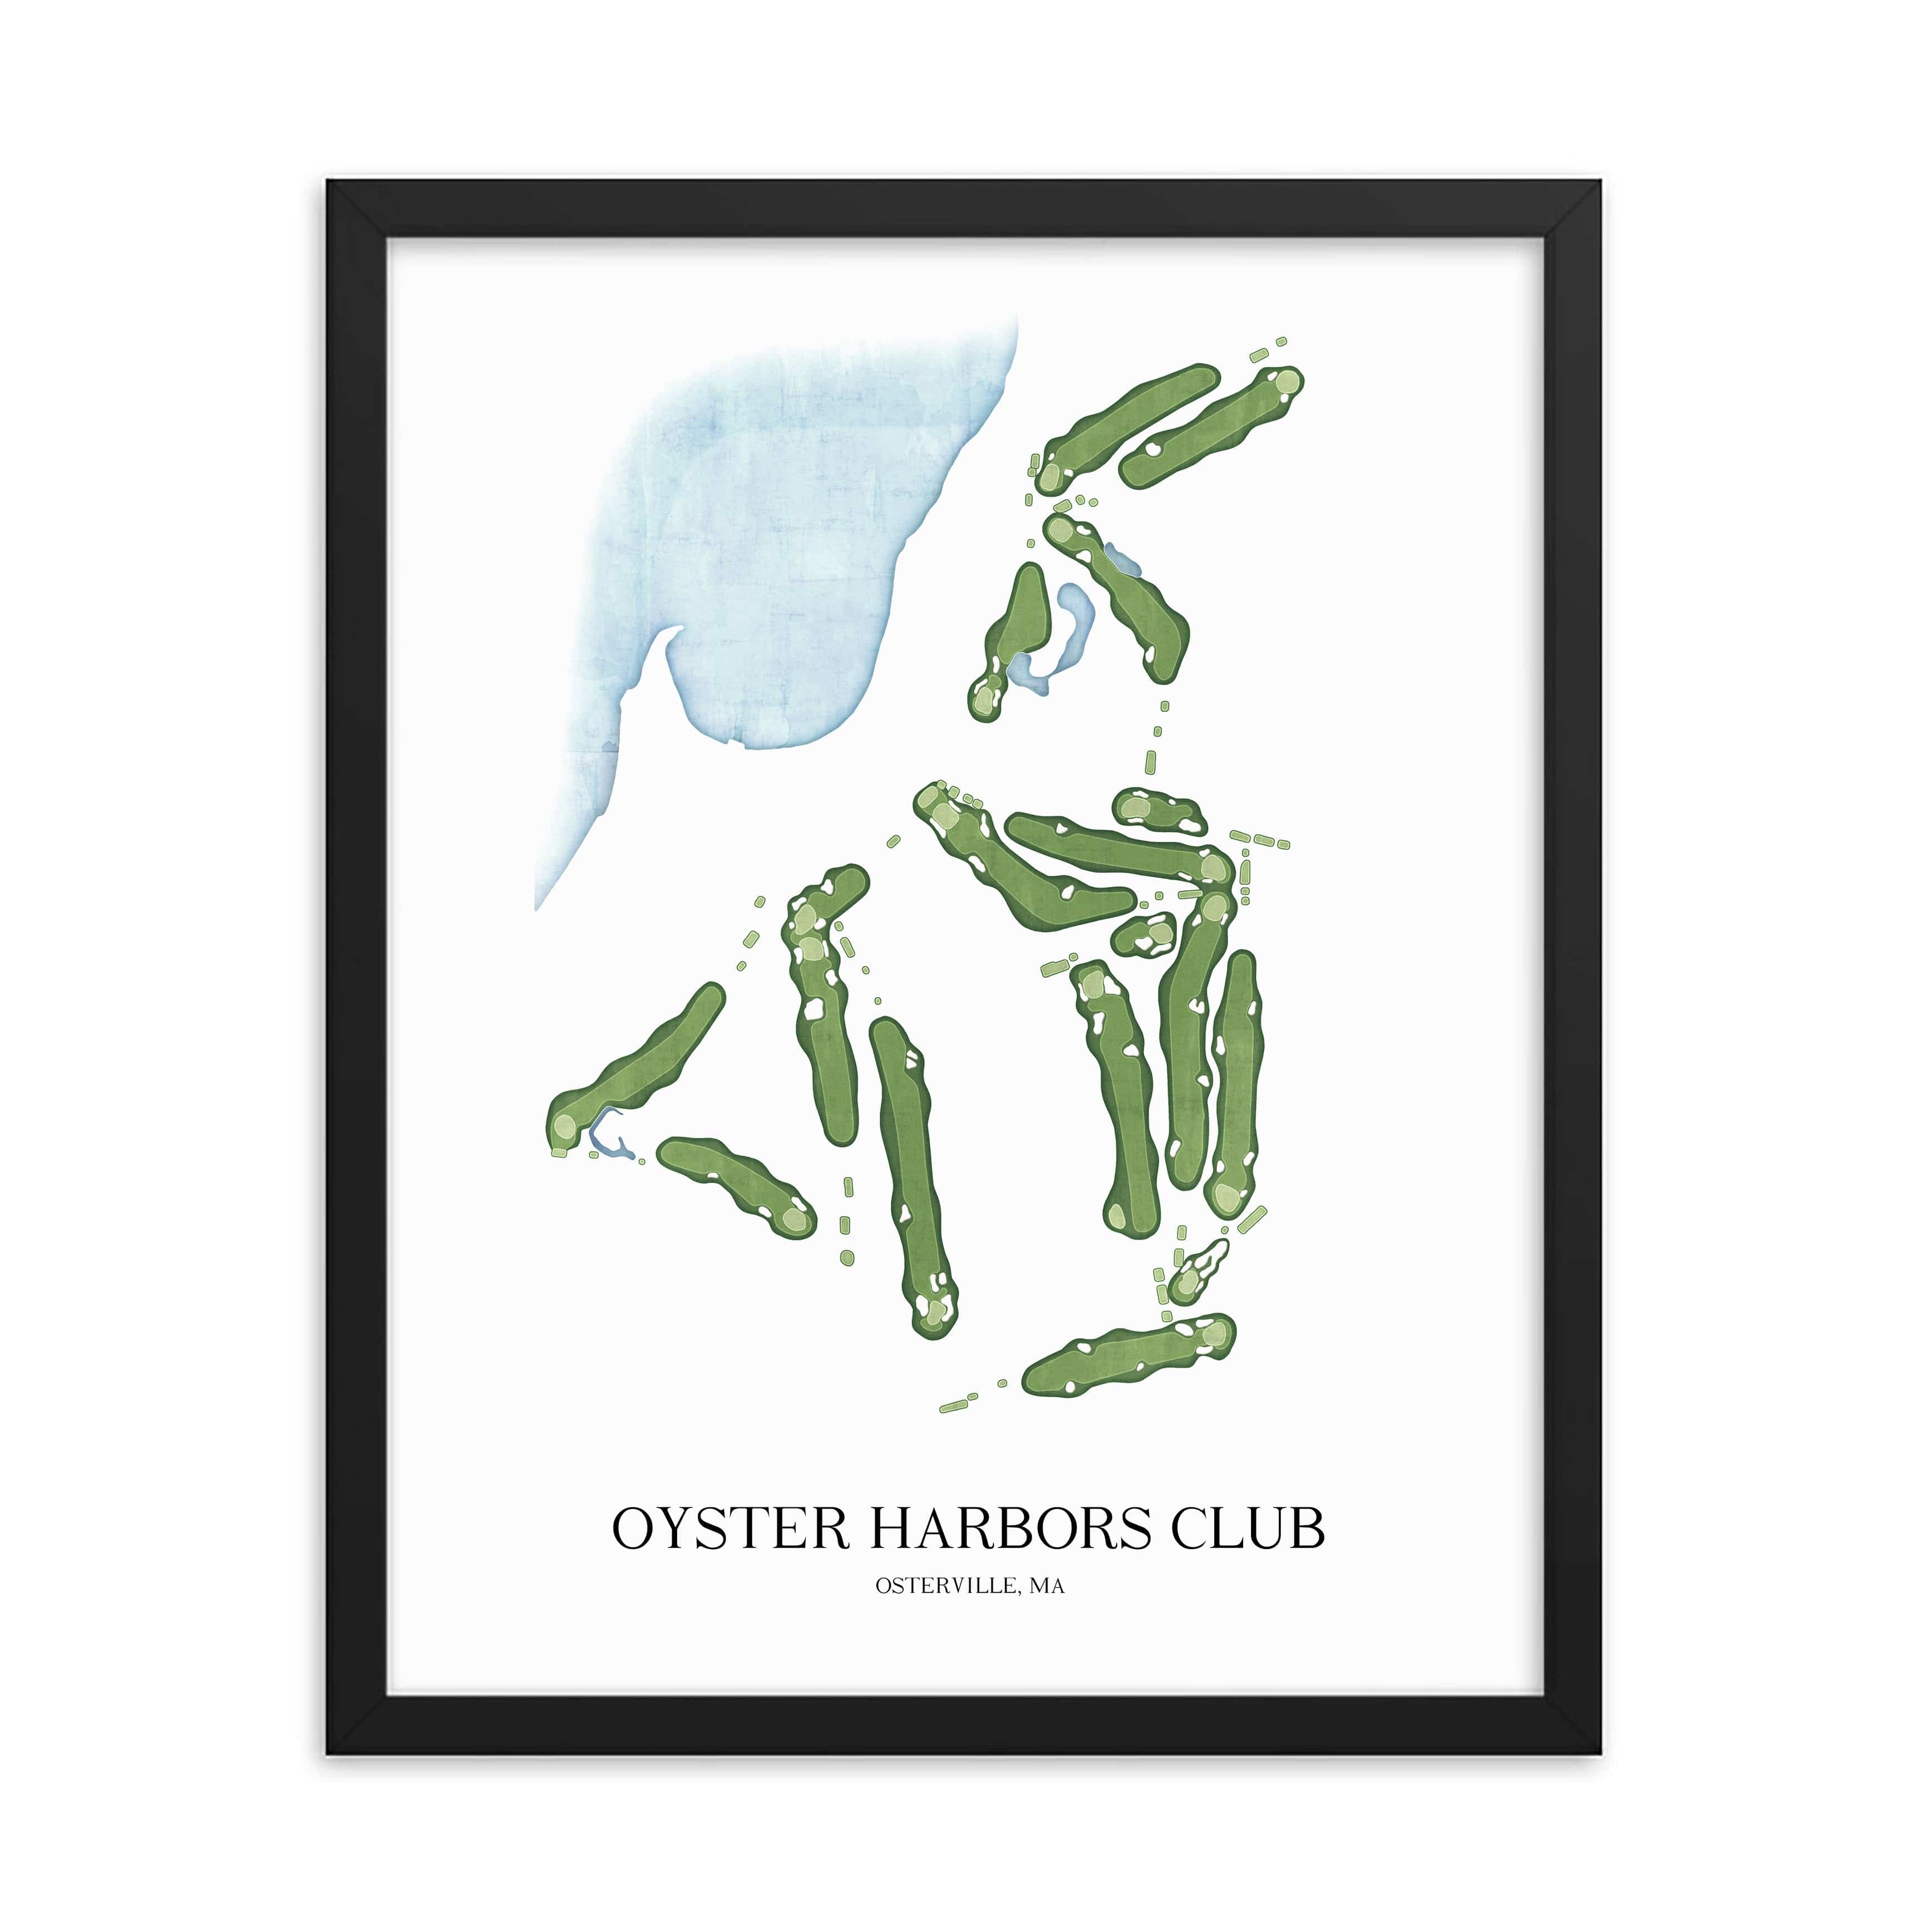 The 19th Hole Golf Shop - Golf Course Prints -  Oyster Harbors Club Golf Course Map